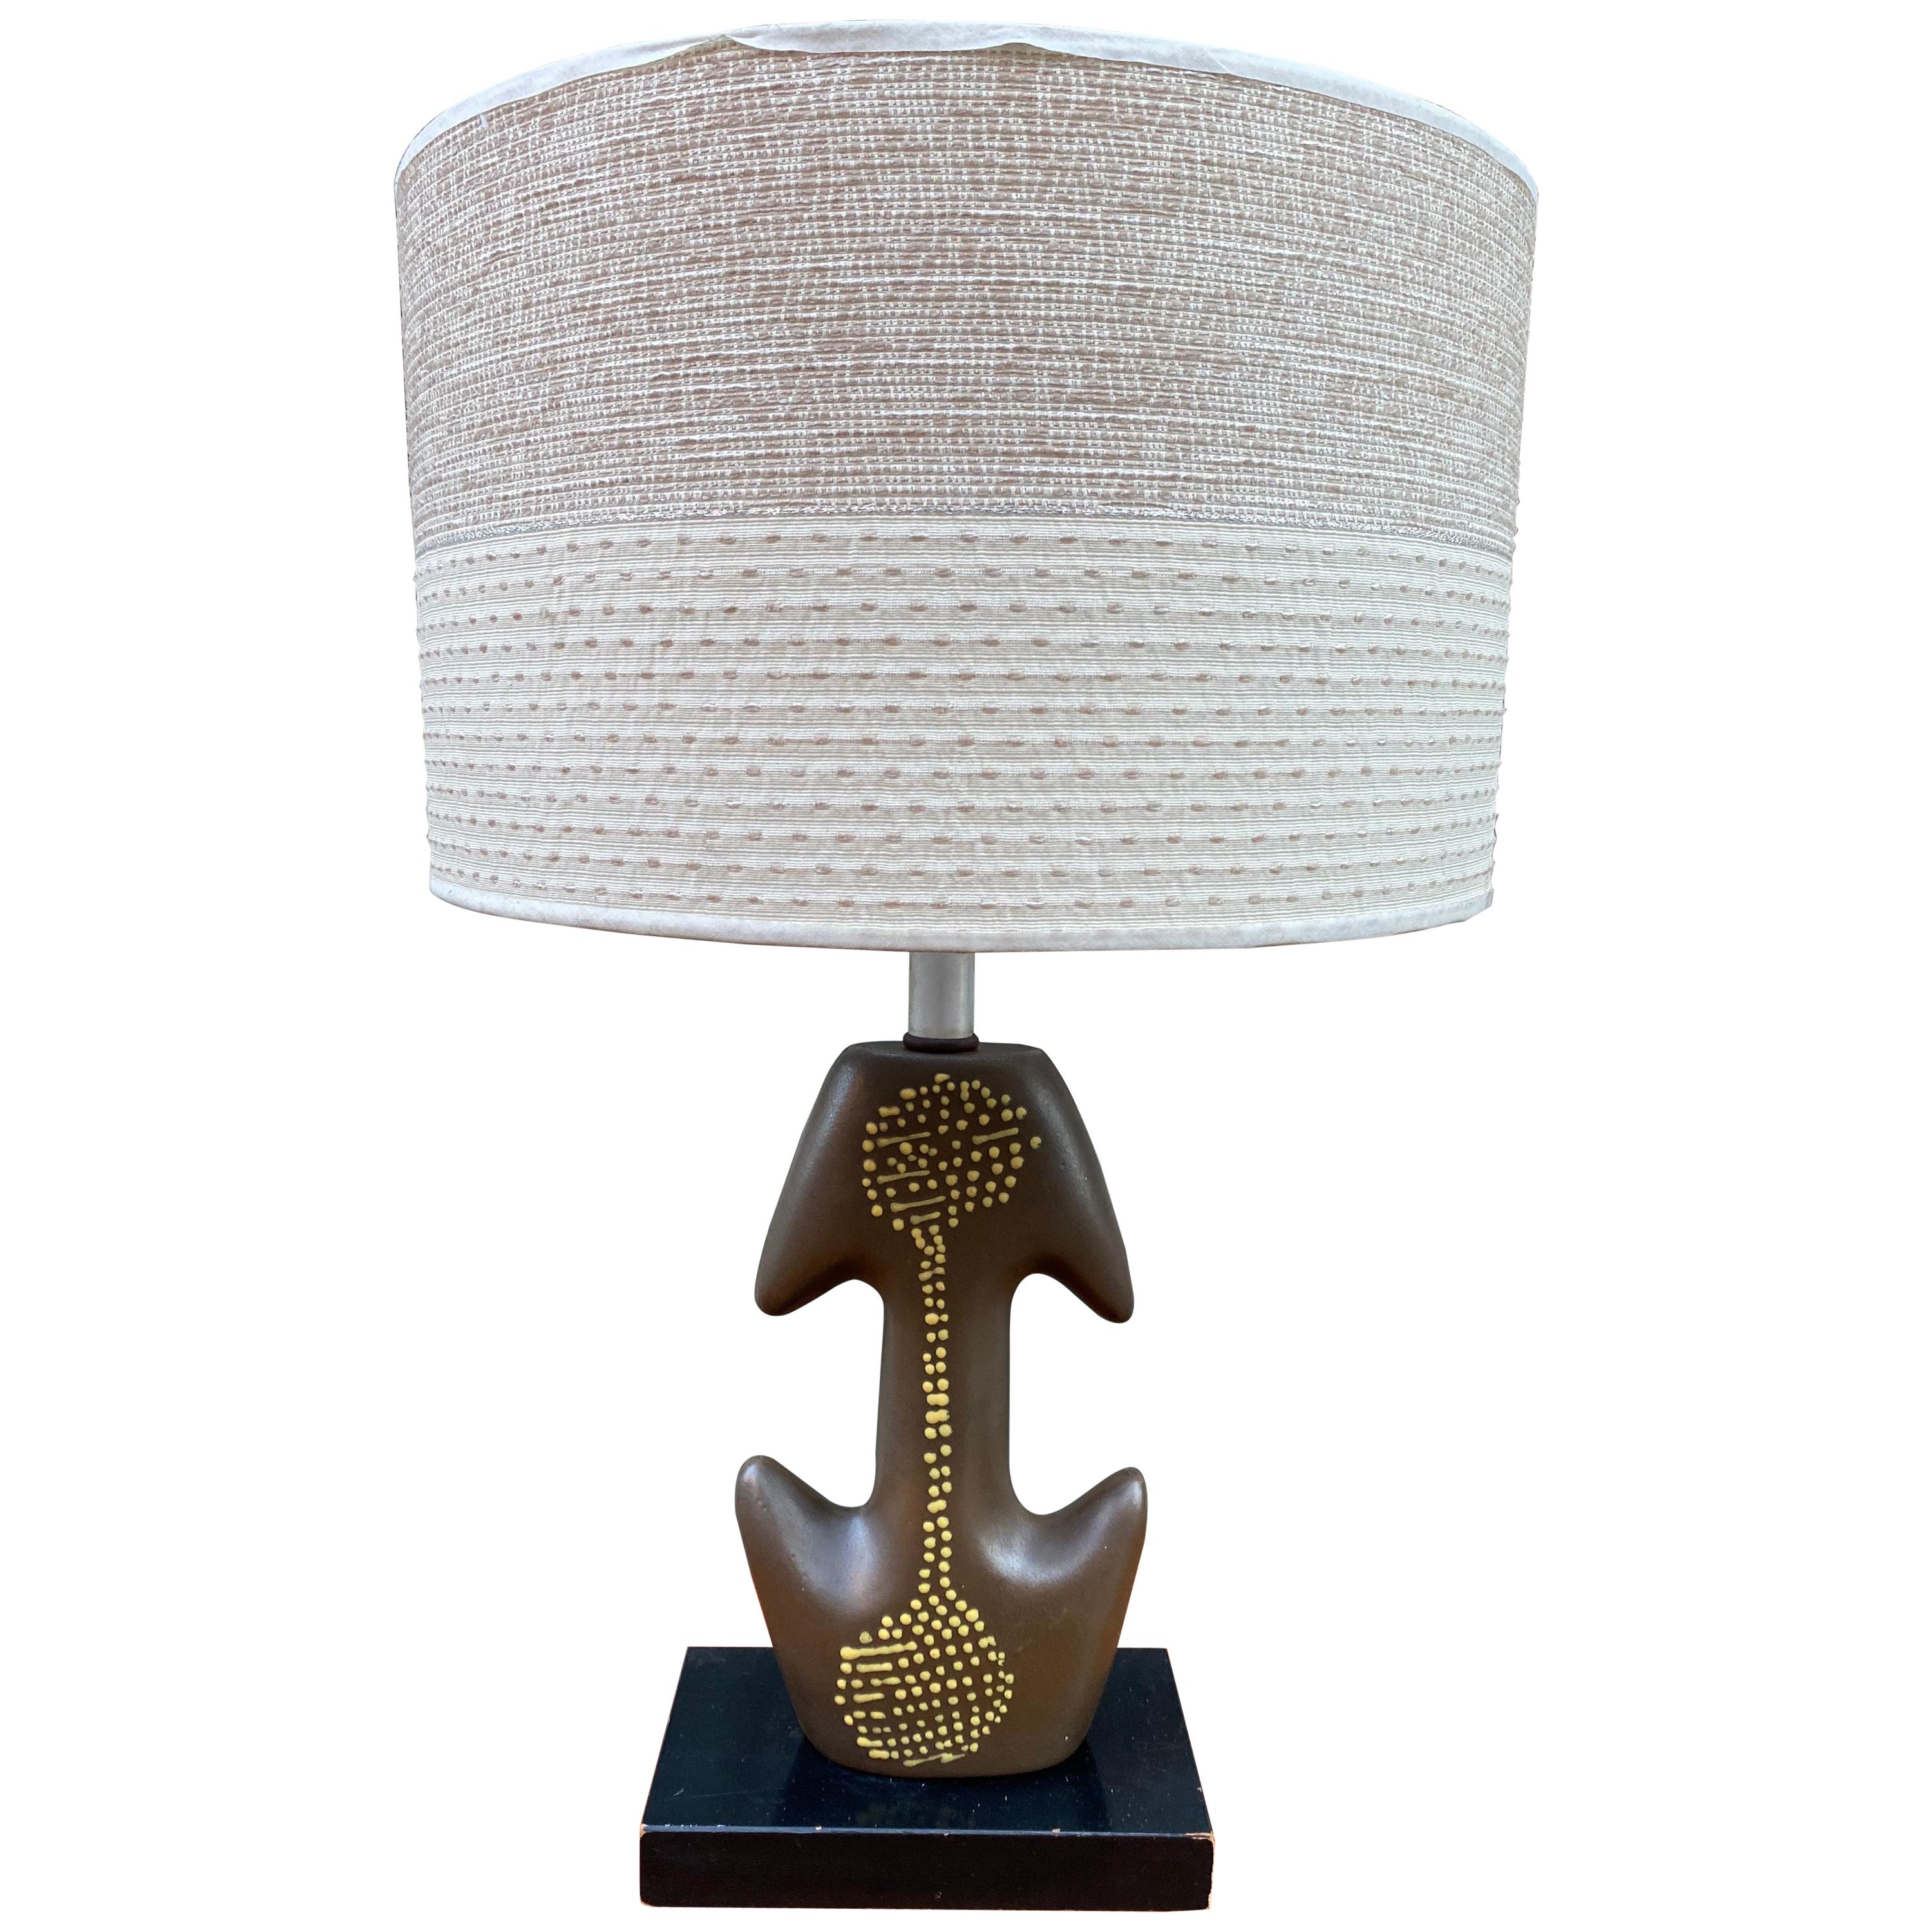 Ceramic Abstract Table Lamp